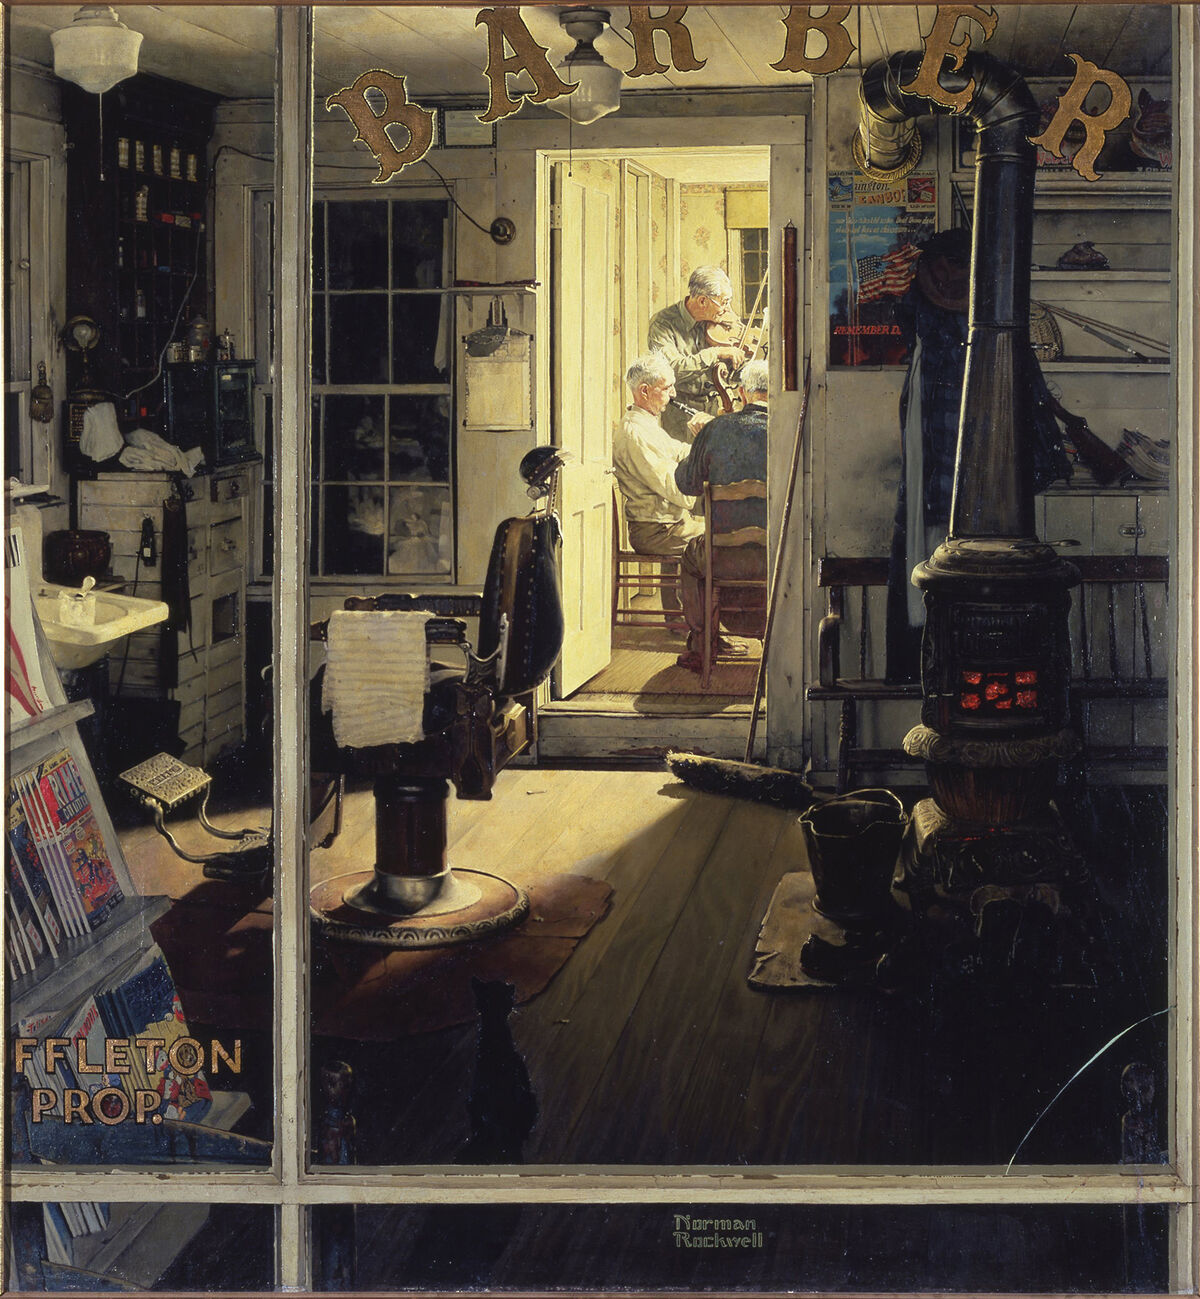 Norman Rockwell, Shuffleton’s Barbershop, 1950. Cover illustration forThe Saturday Evening Post, April 29, 1950. © SEPS: Licensed by Curtis Licensing, Indianapolis, IN. Courtesy of the Lucas Museum of Narrative Art and the Norman Rockwell Museum.